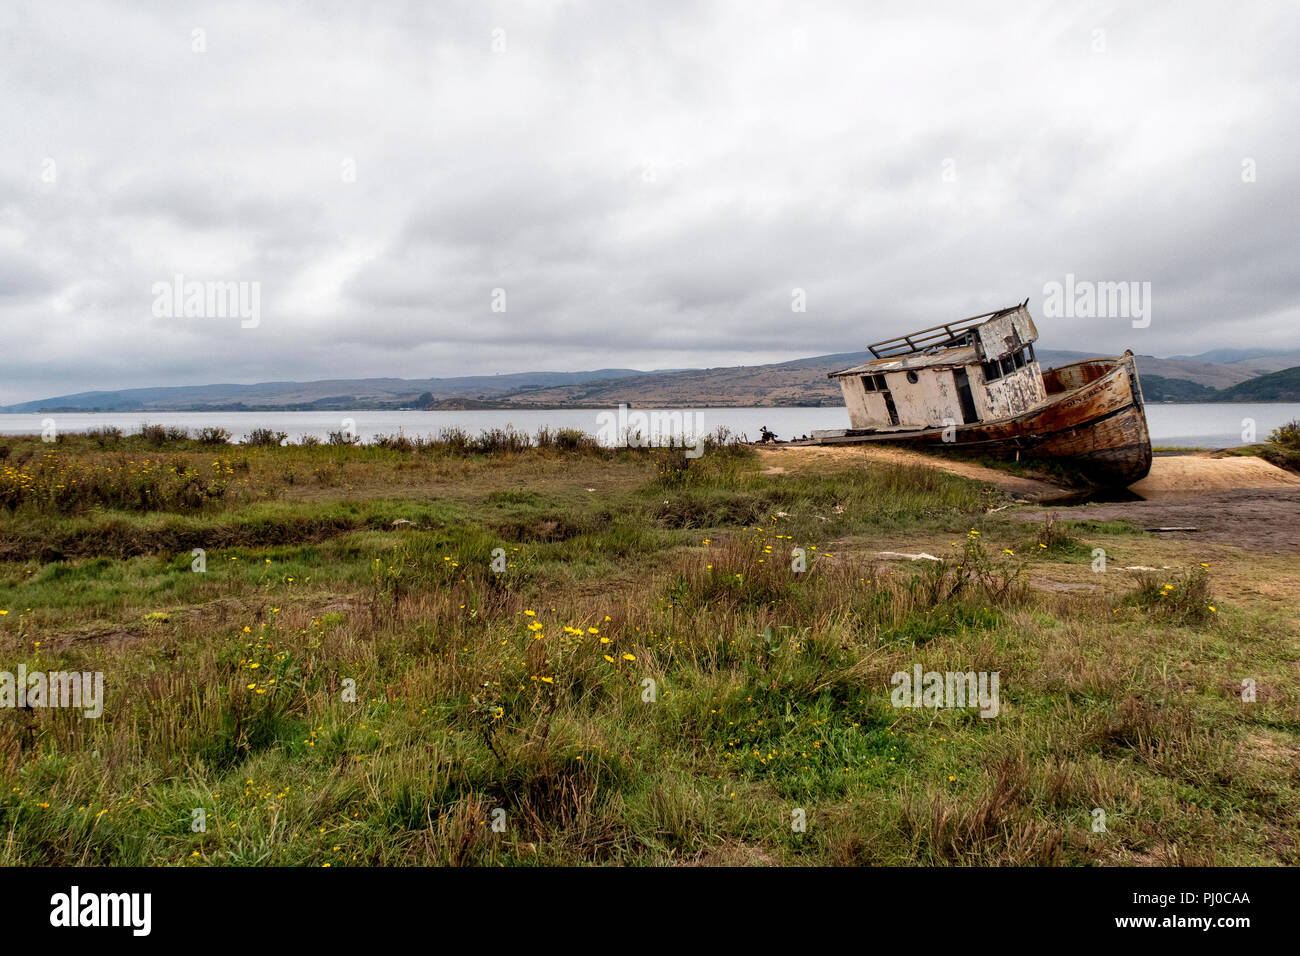 The Point Reyes abandoned shipwreck along the shore of Tomales Bay at Inverness, Point Reyes National Seashore, California. Stock Photo